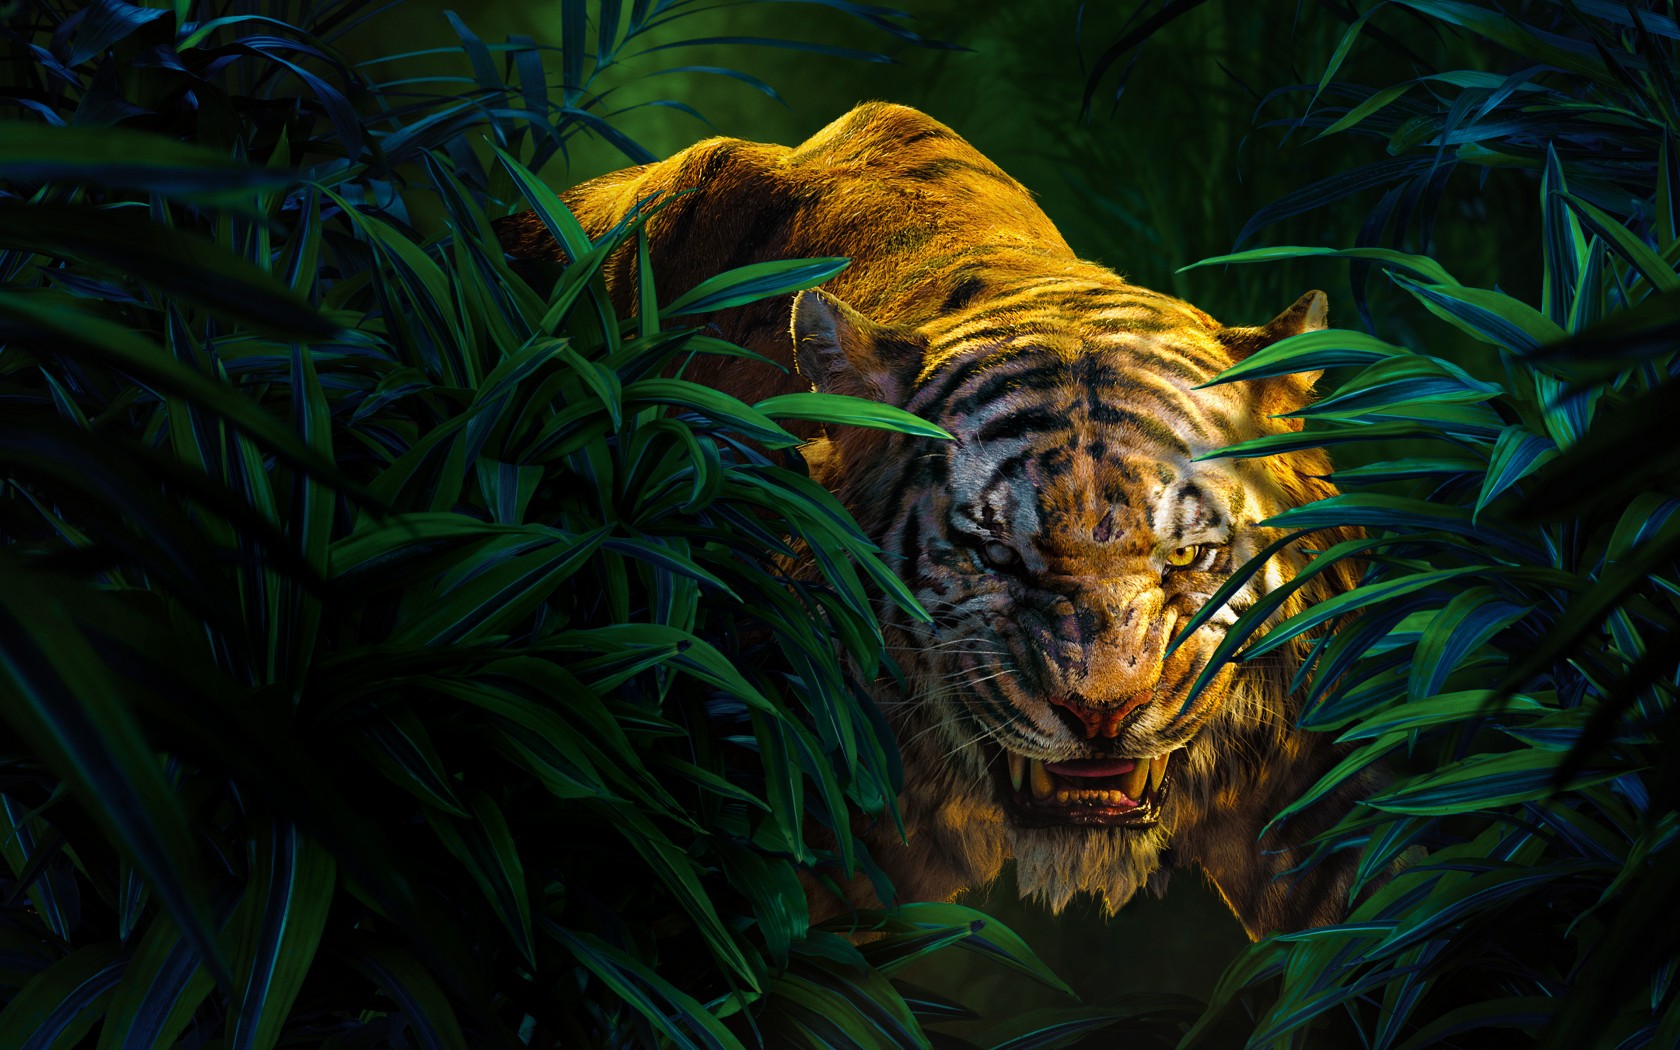 The Jungle Book for iphone download